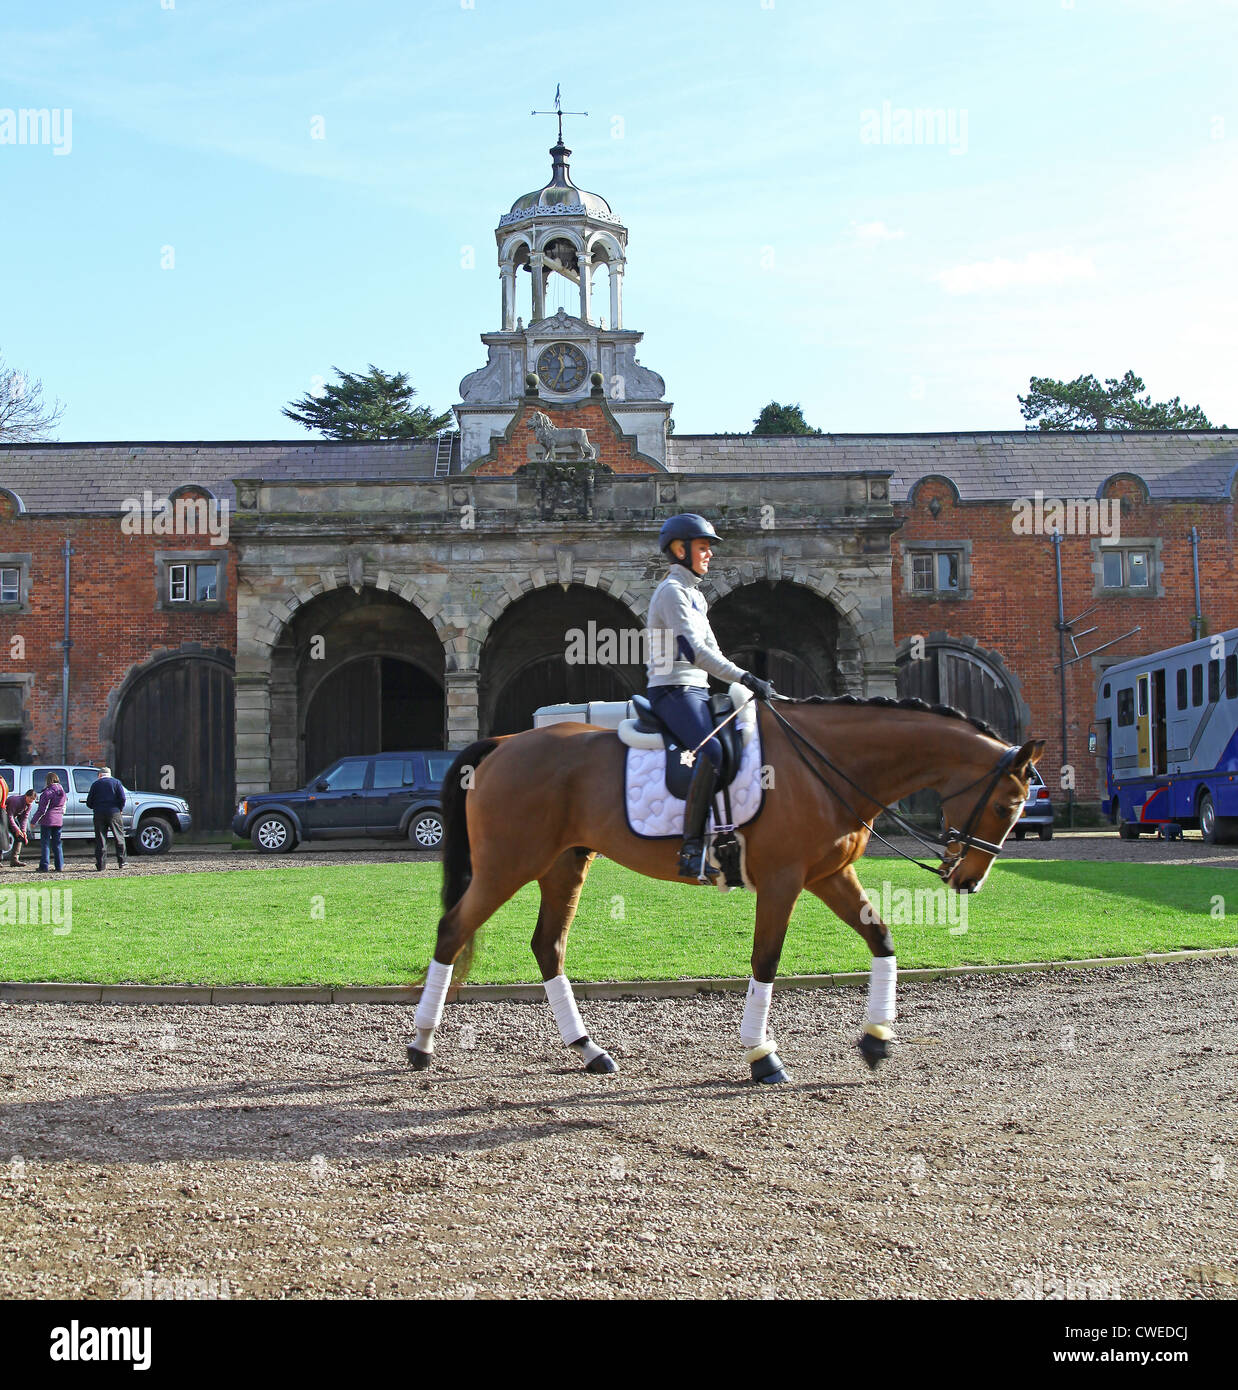 A young woman riding a horse and Horse boxes at Ingestre Hall Stables Ingestre near to Stafford Staffordshire England UK Stock Photo